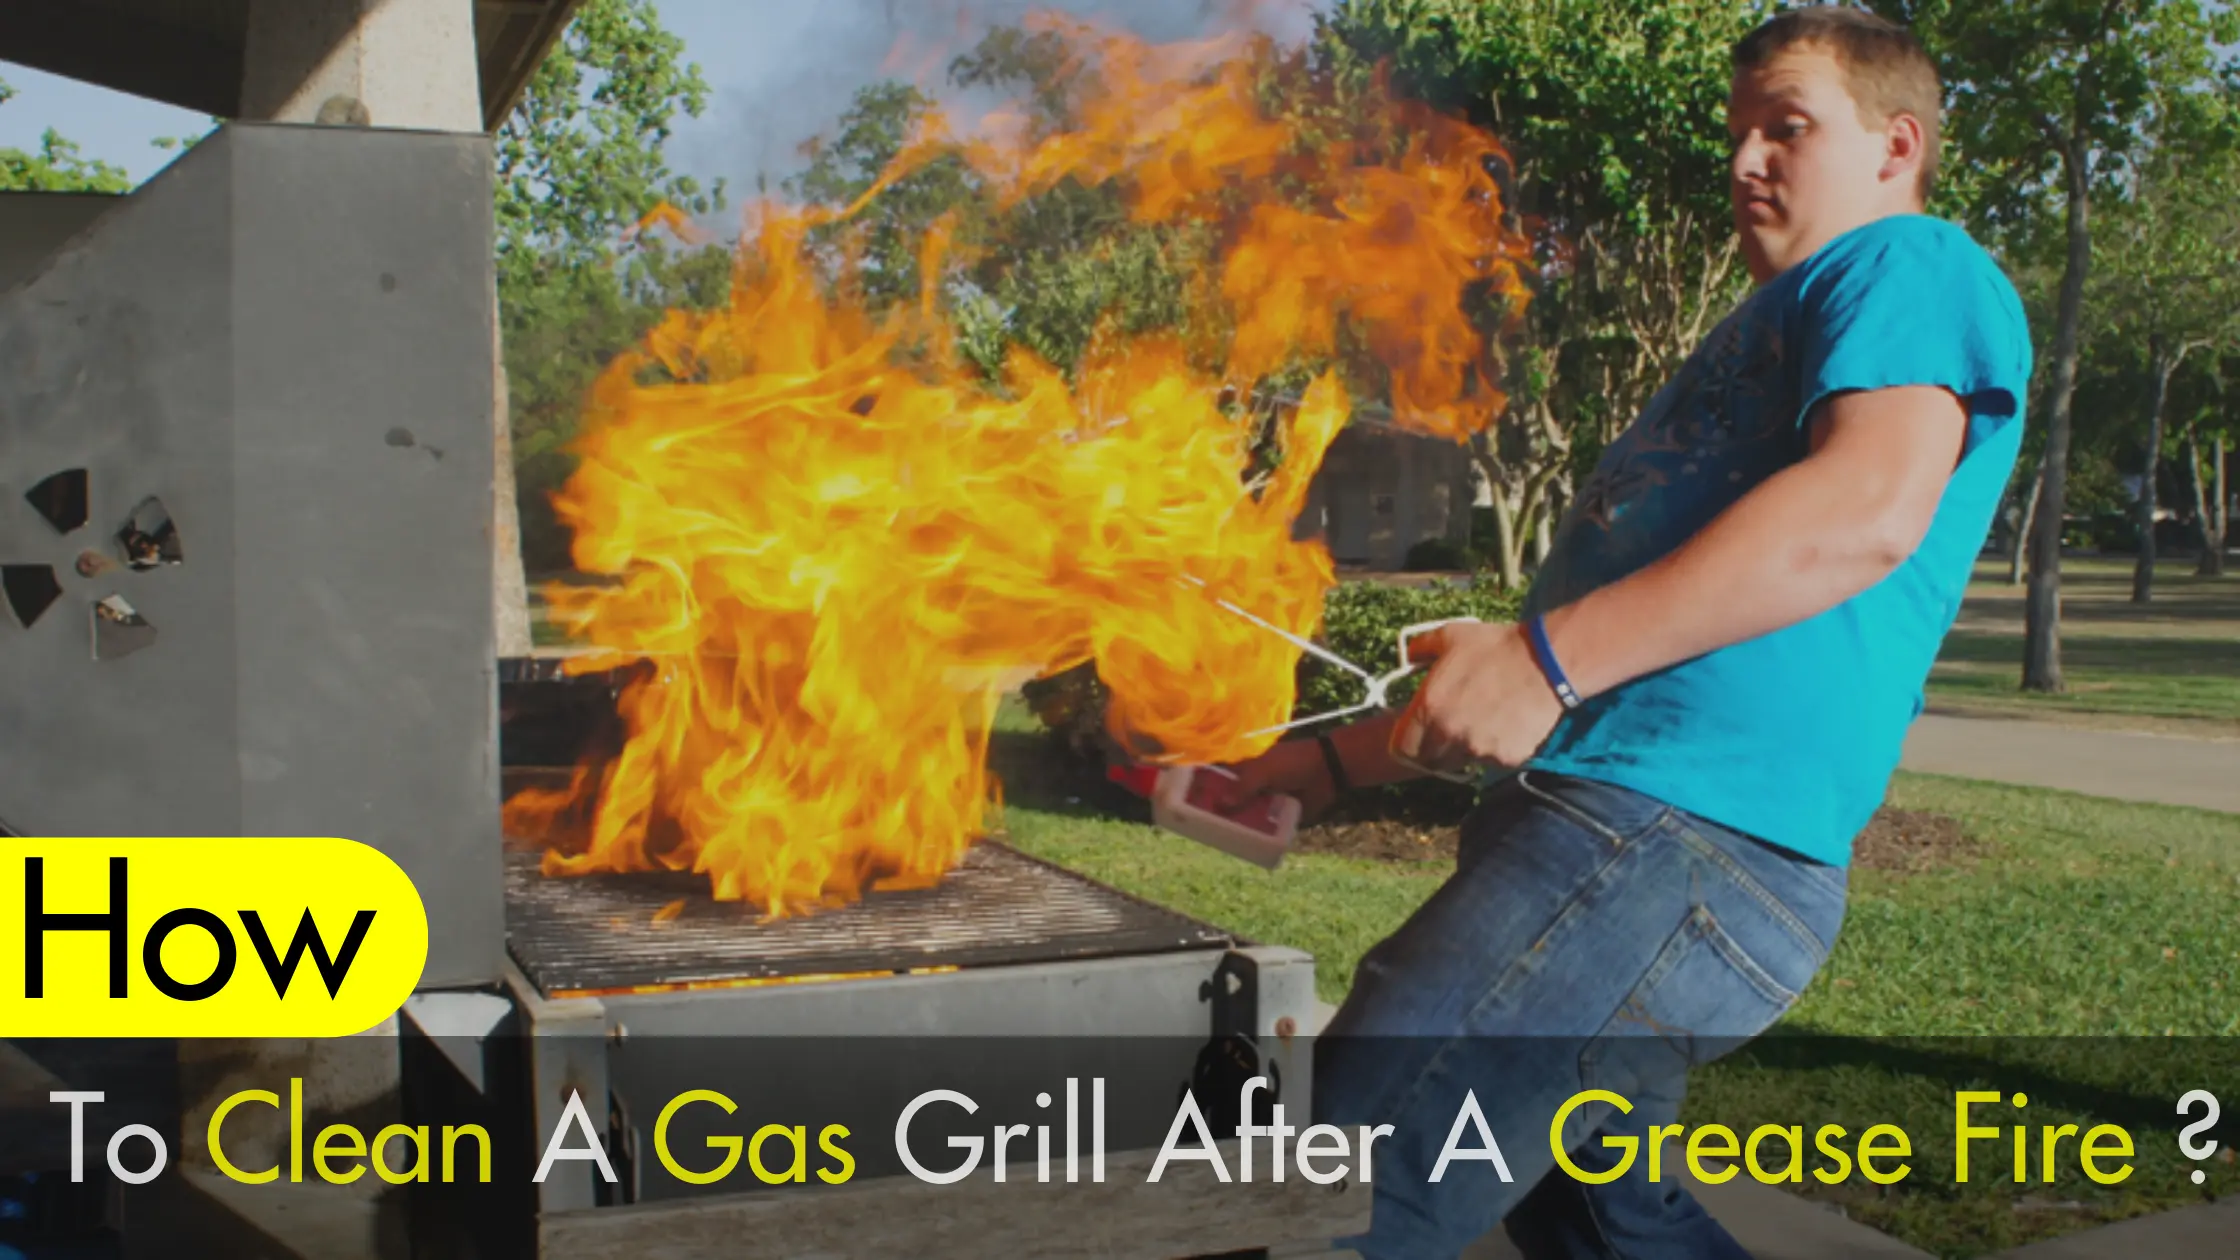 how to clean a gas grill after a grease fire